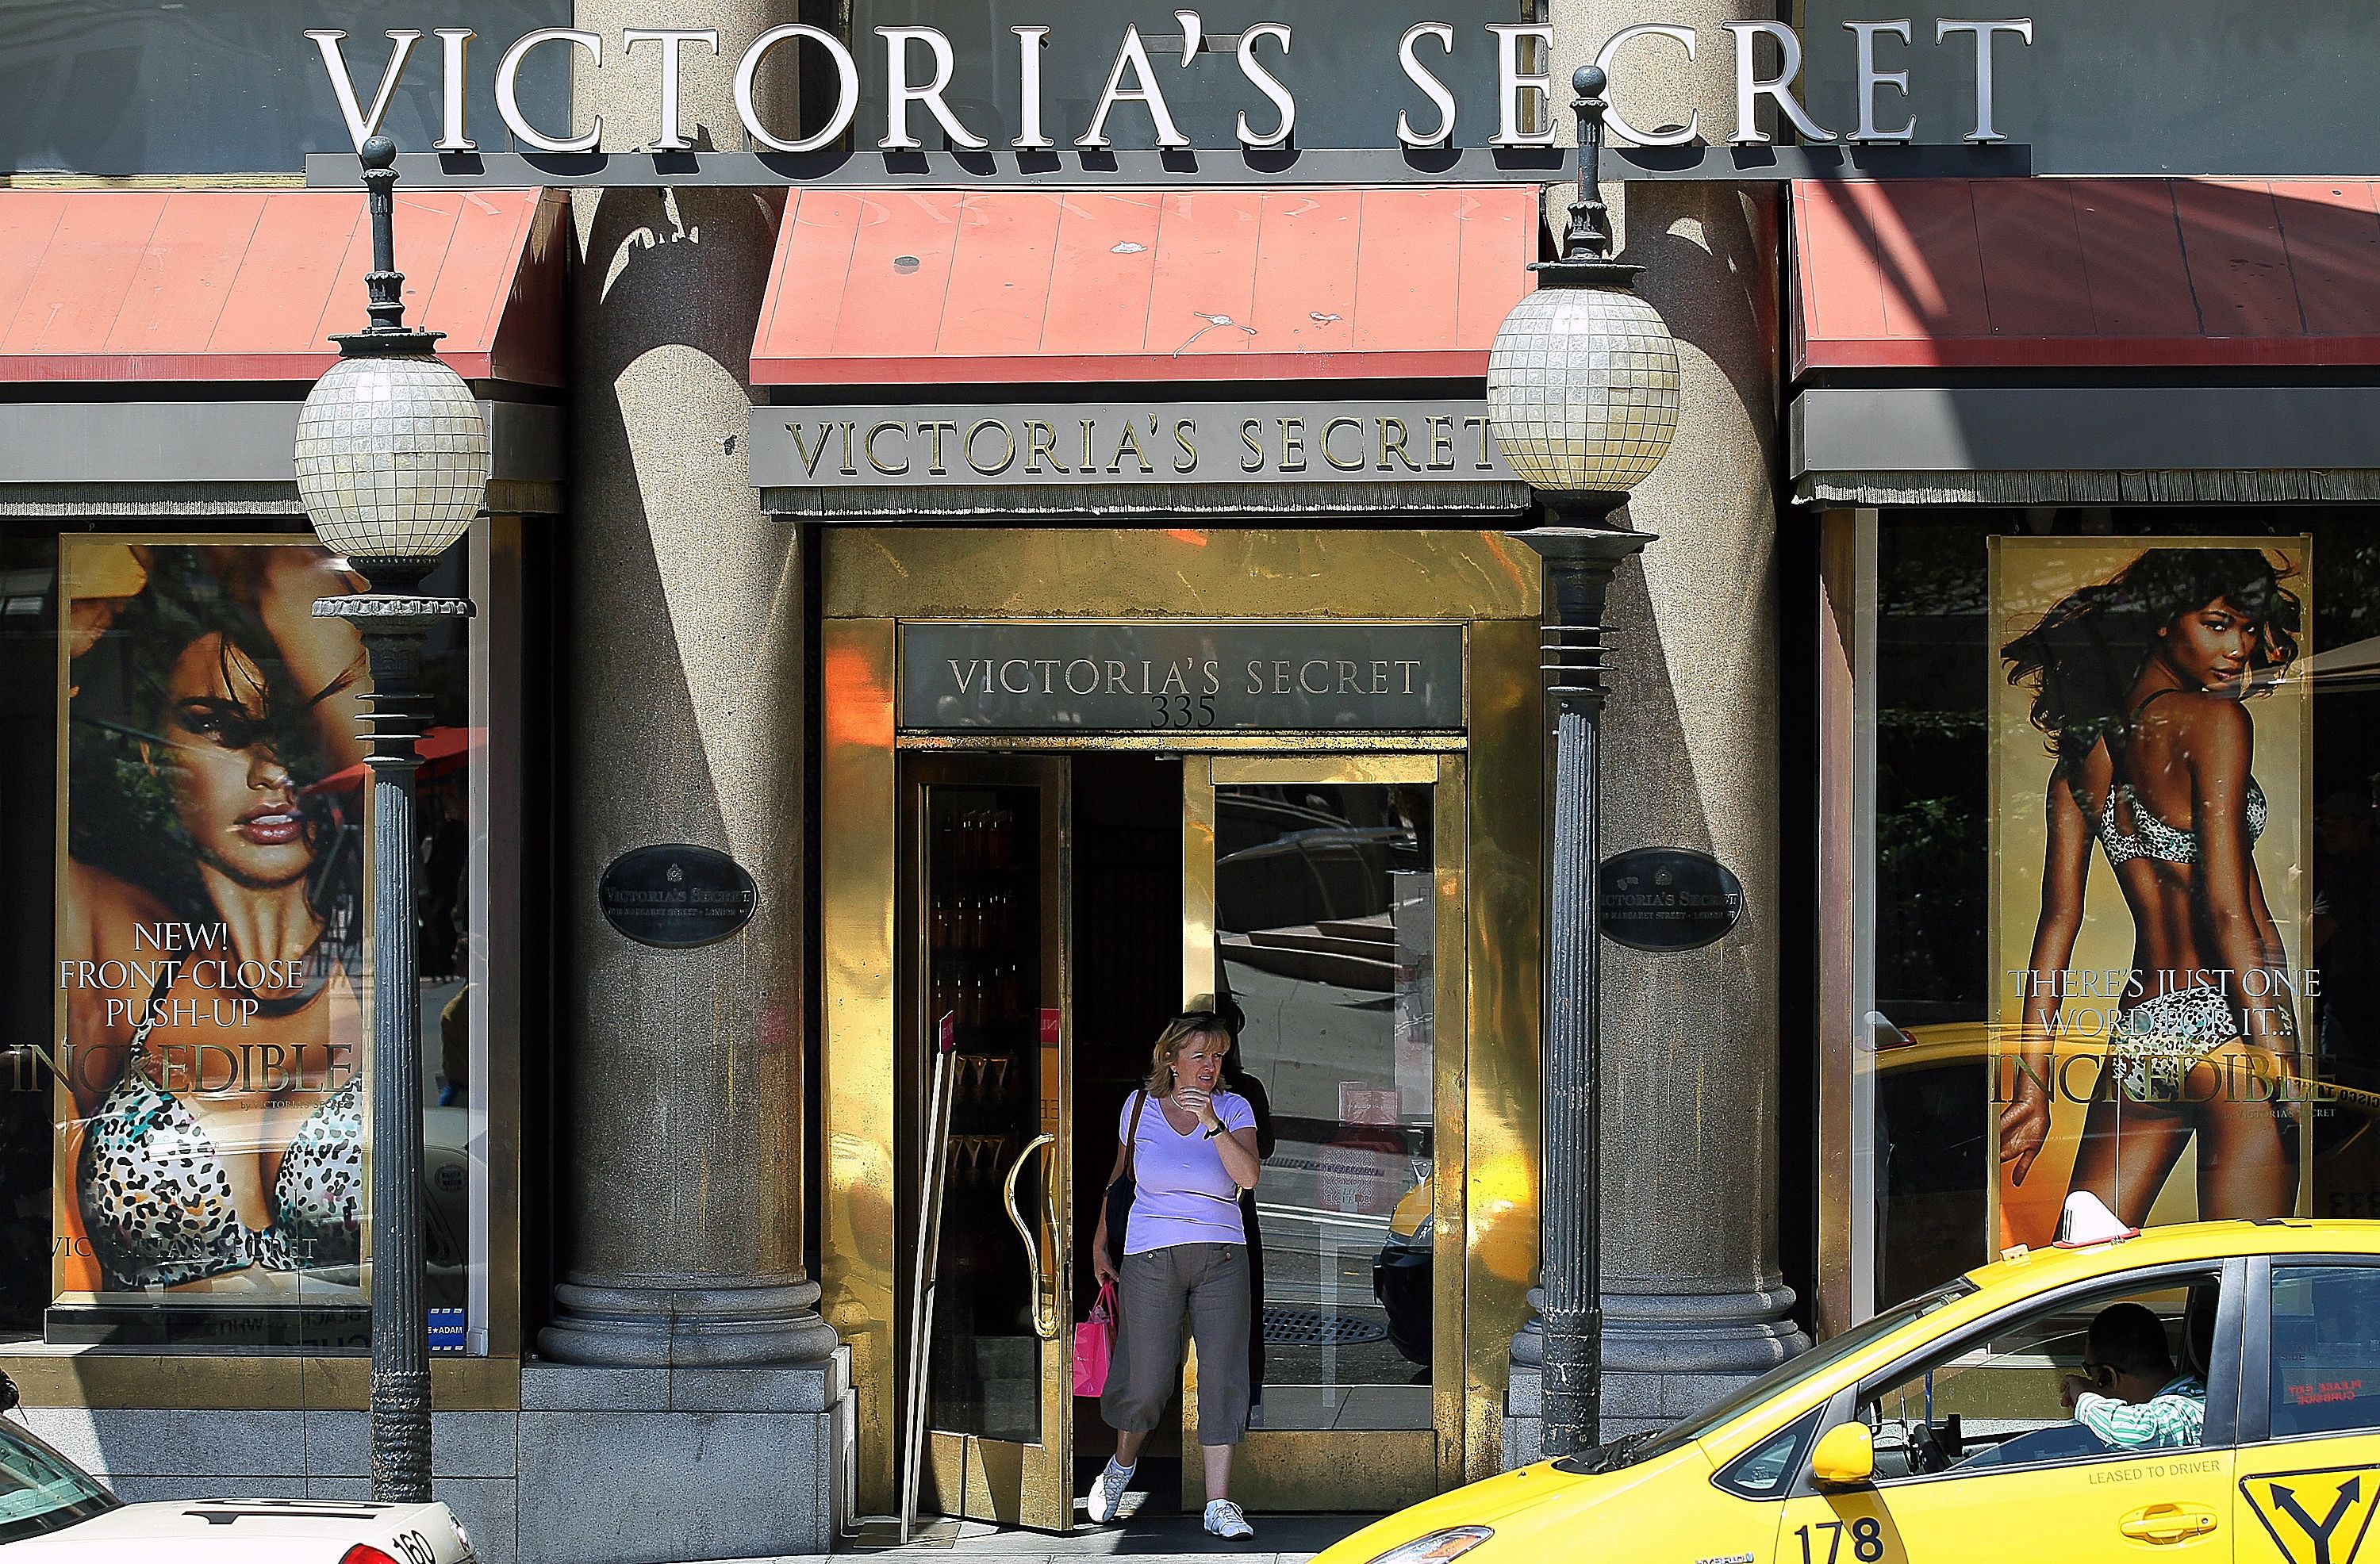 Victoria's Secret Caught Selling Used Underwear - Life & Style